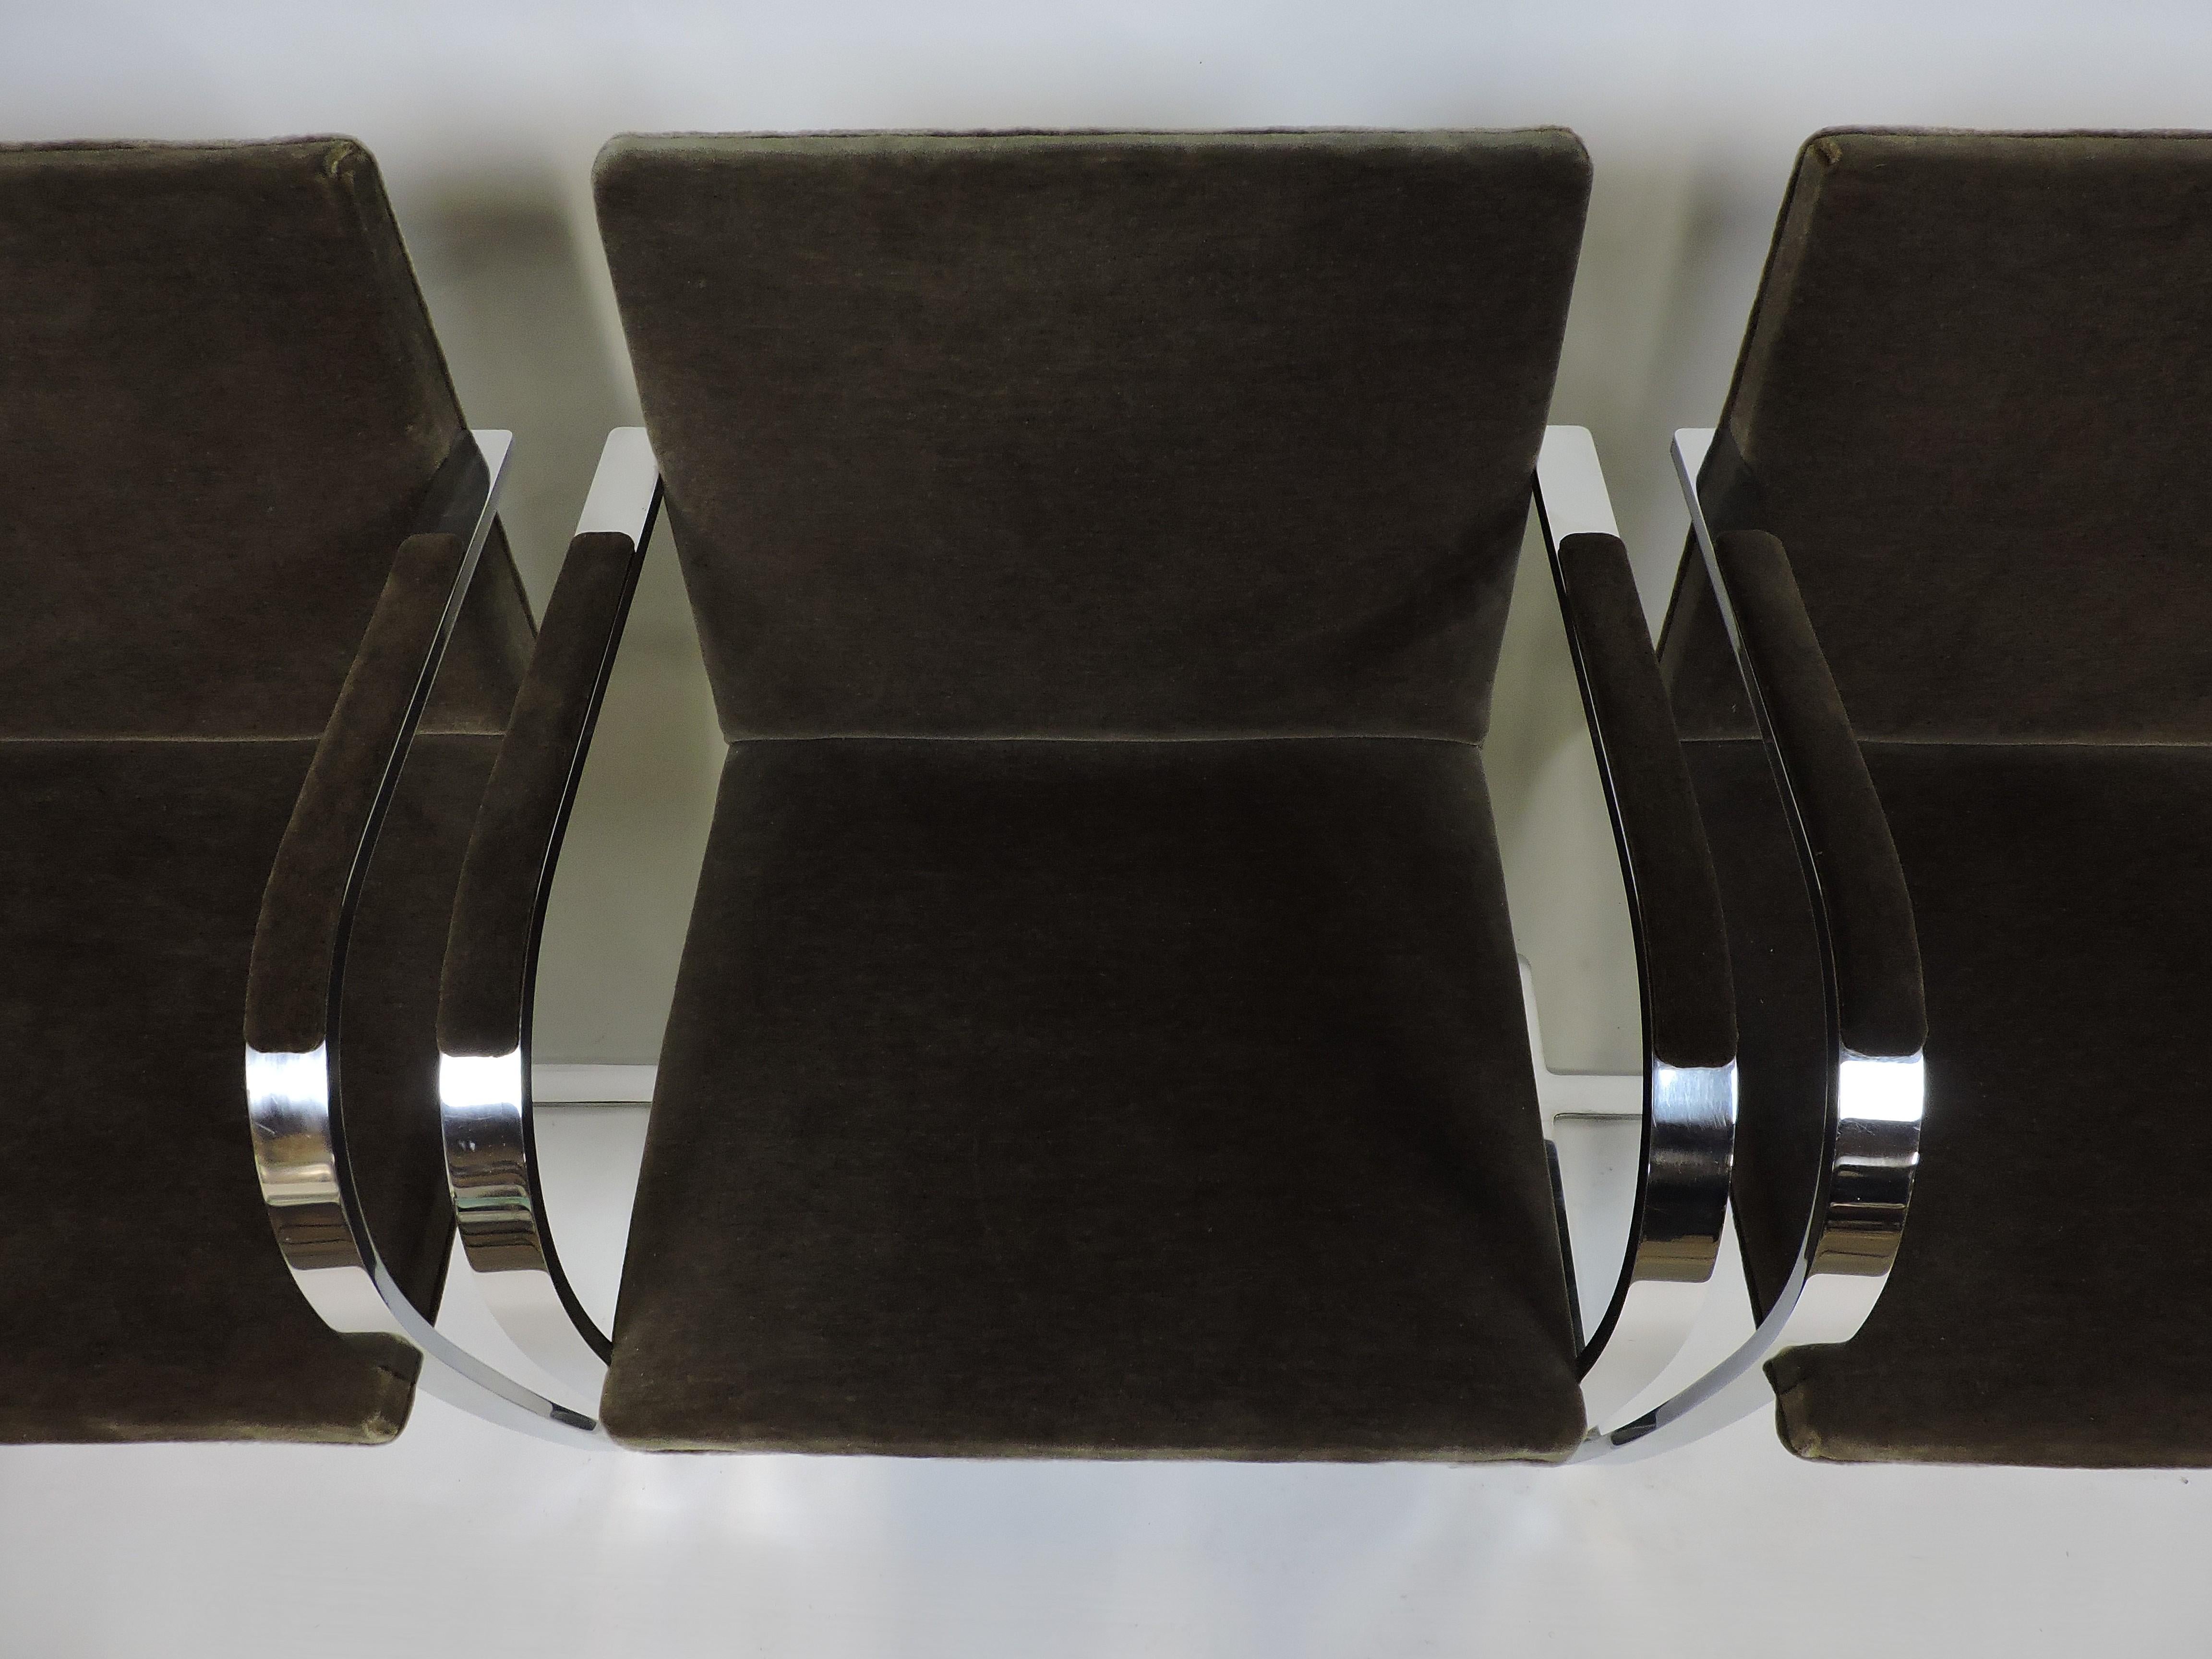 Late 20th Century Mies van der Rohe for Knoll Brno Flat Bar Stainless Steel Chair, 3 Available